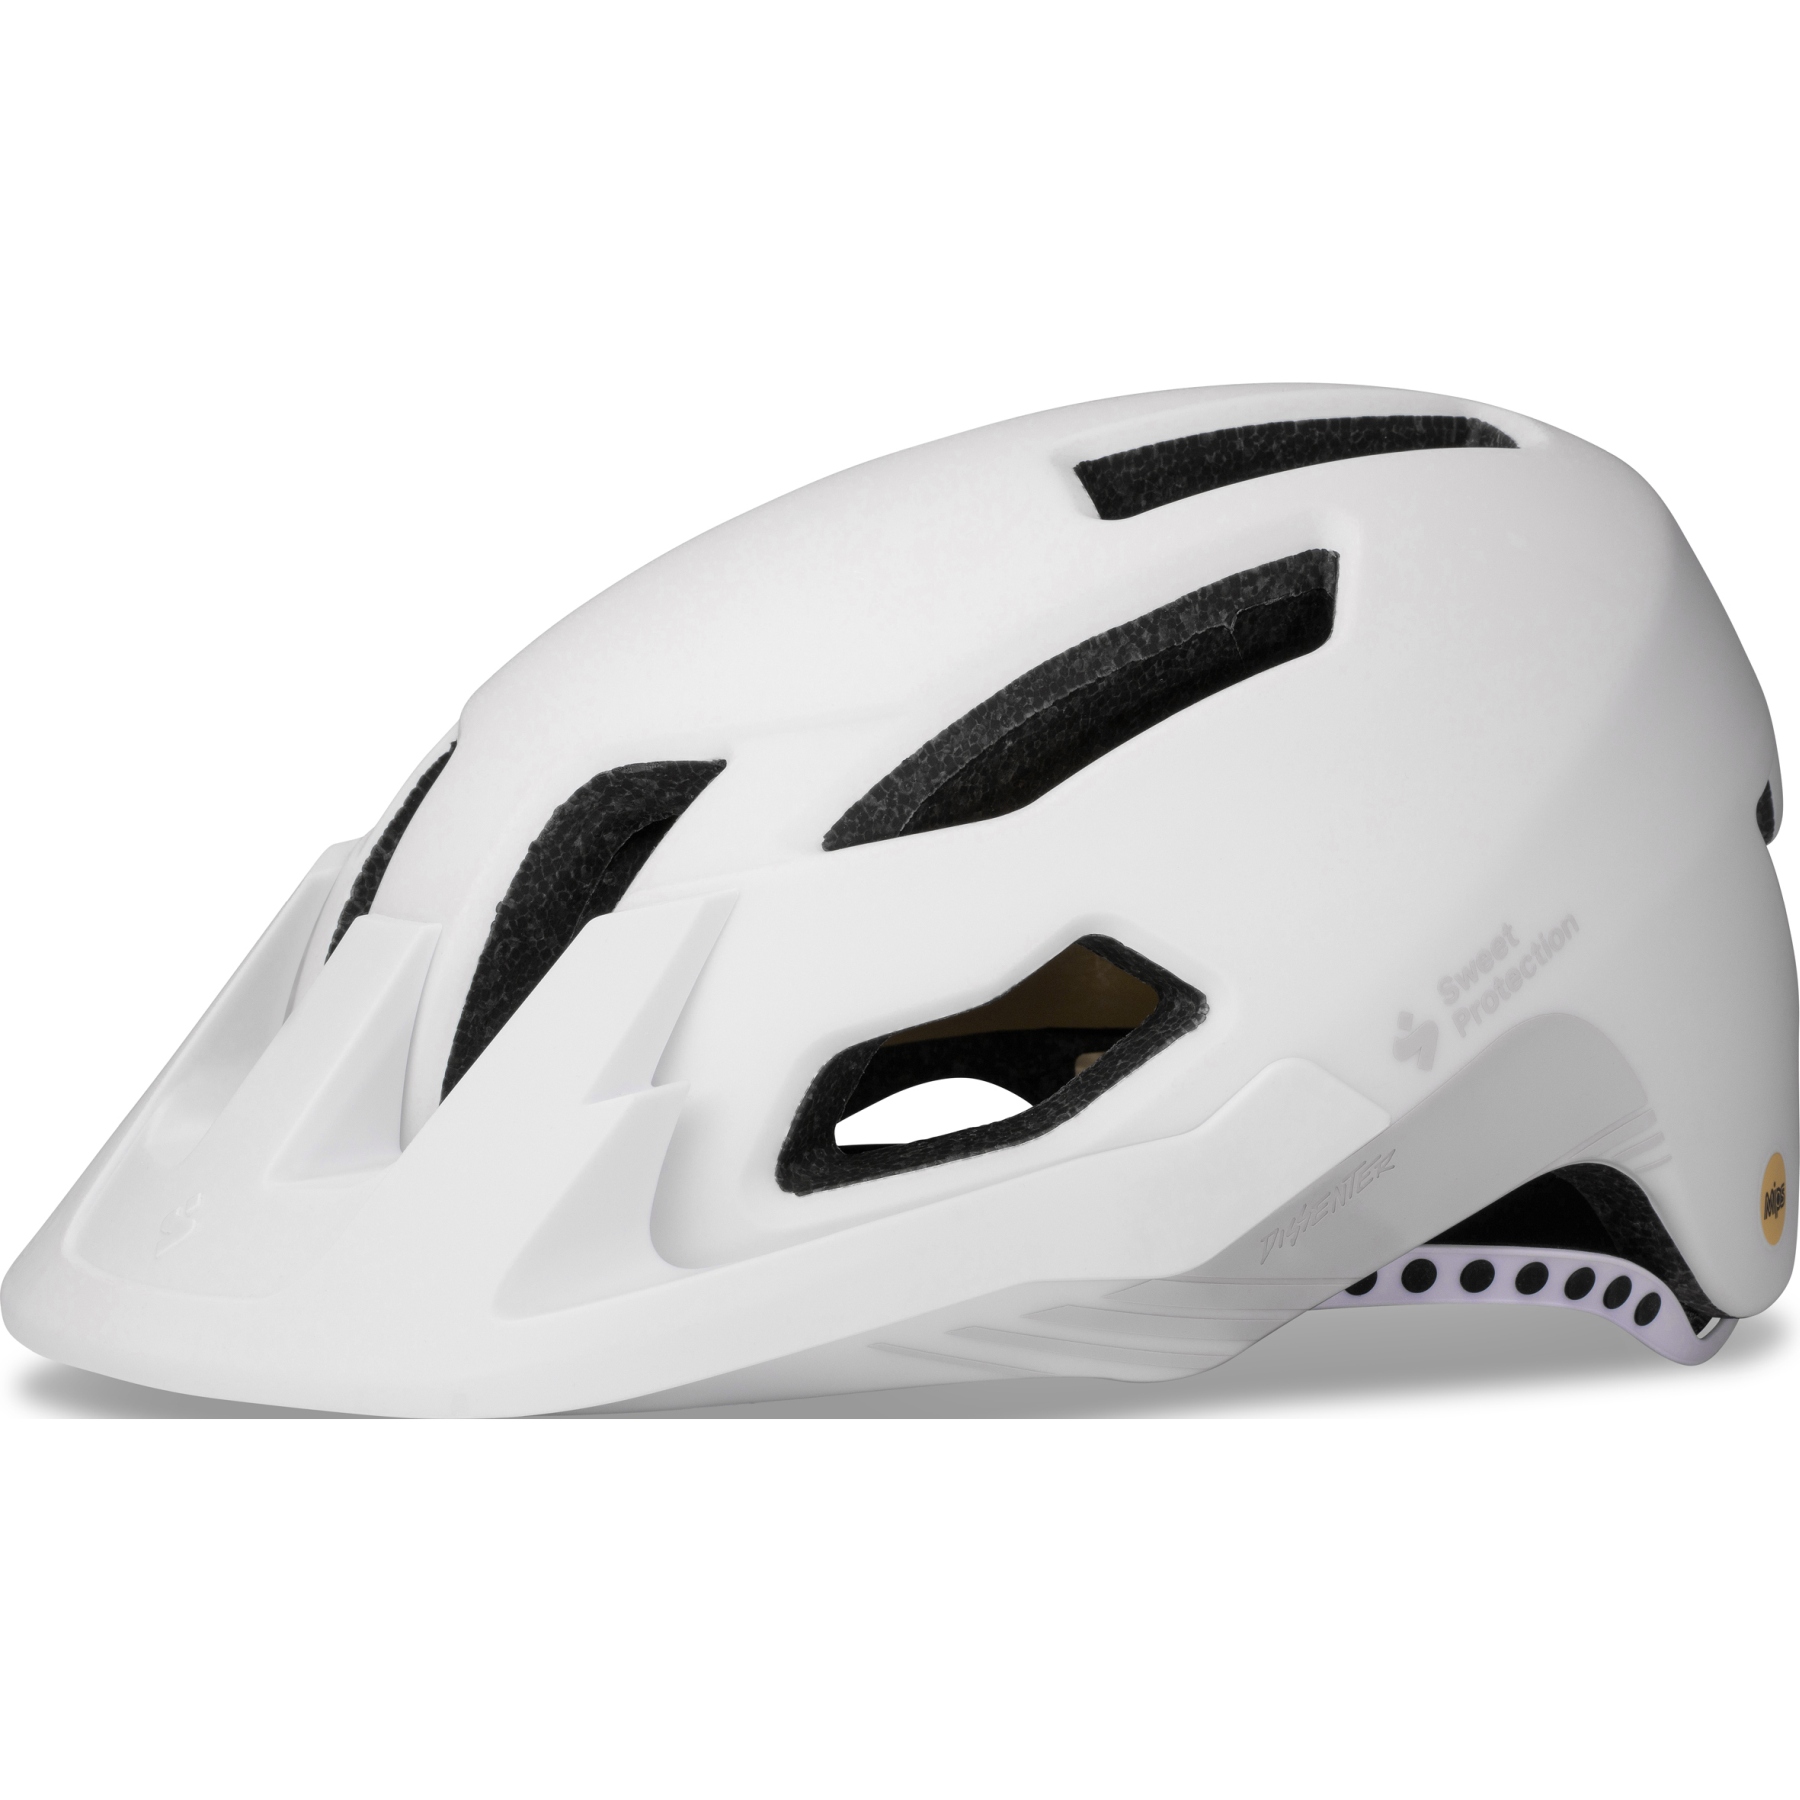 Picture of SWEET Protection Dissenter MIPS Helmet - Matte White